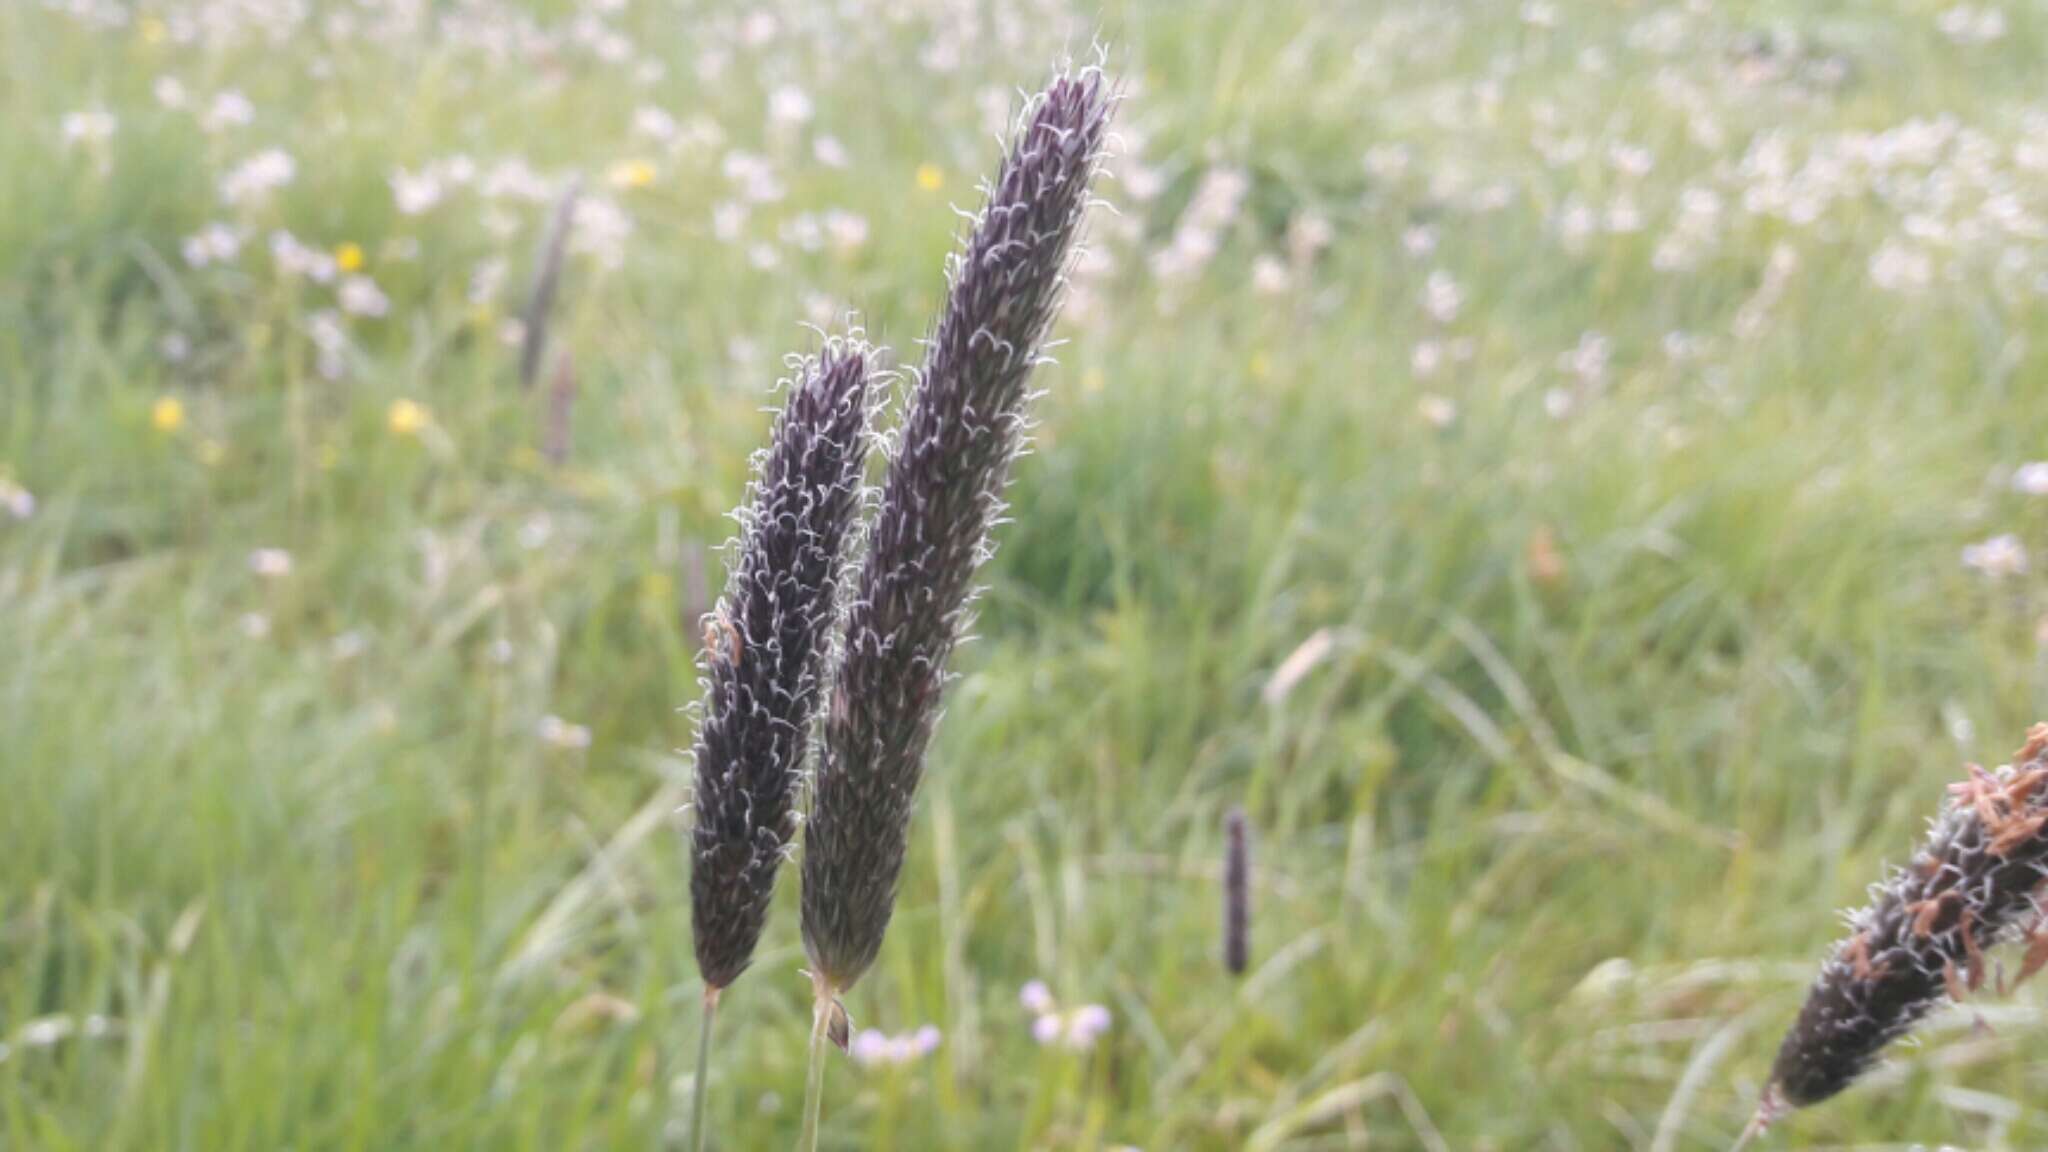 Image of meadow foxtail